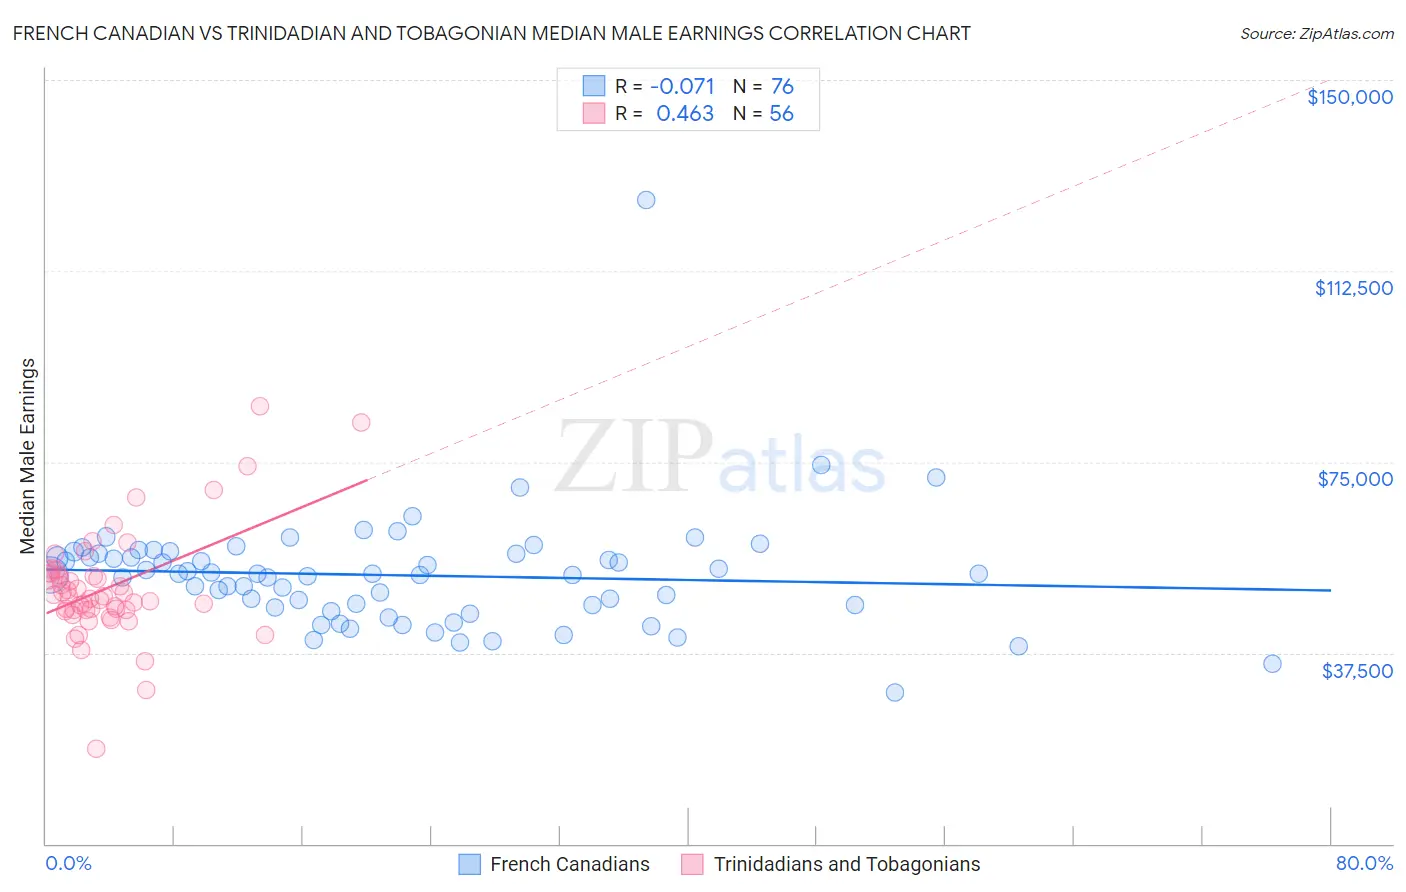 French Canadian vs Trinidadian and Tobagonian Median Male Earnings